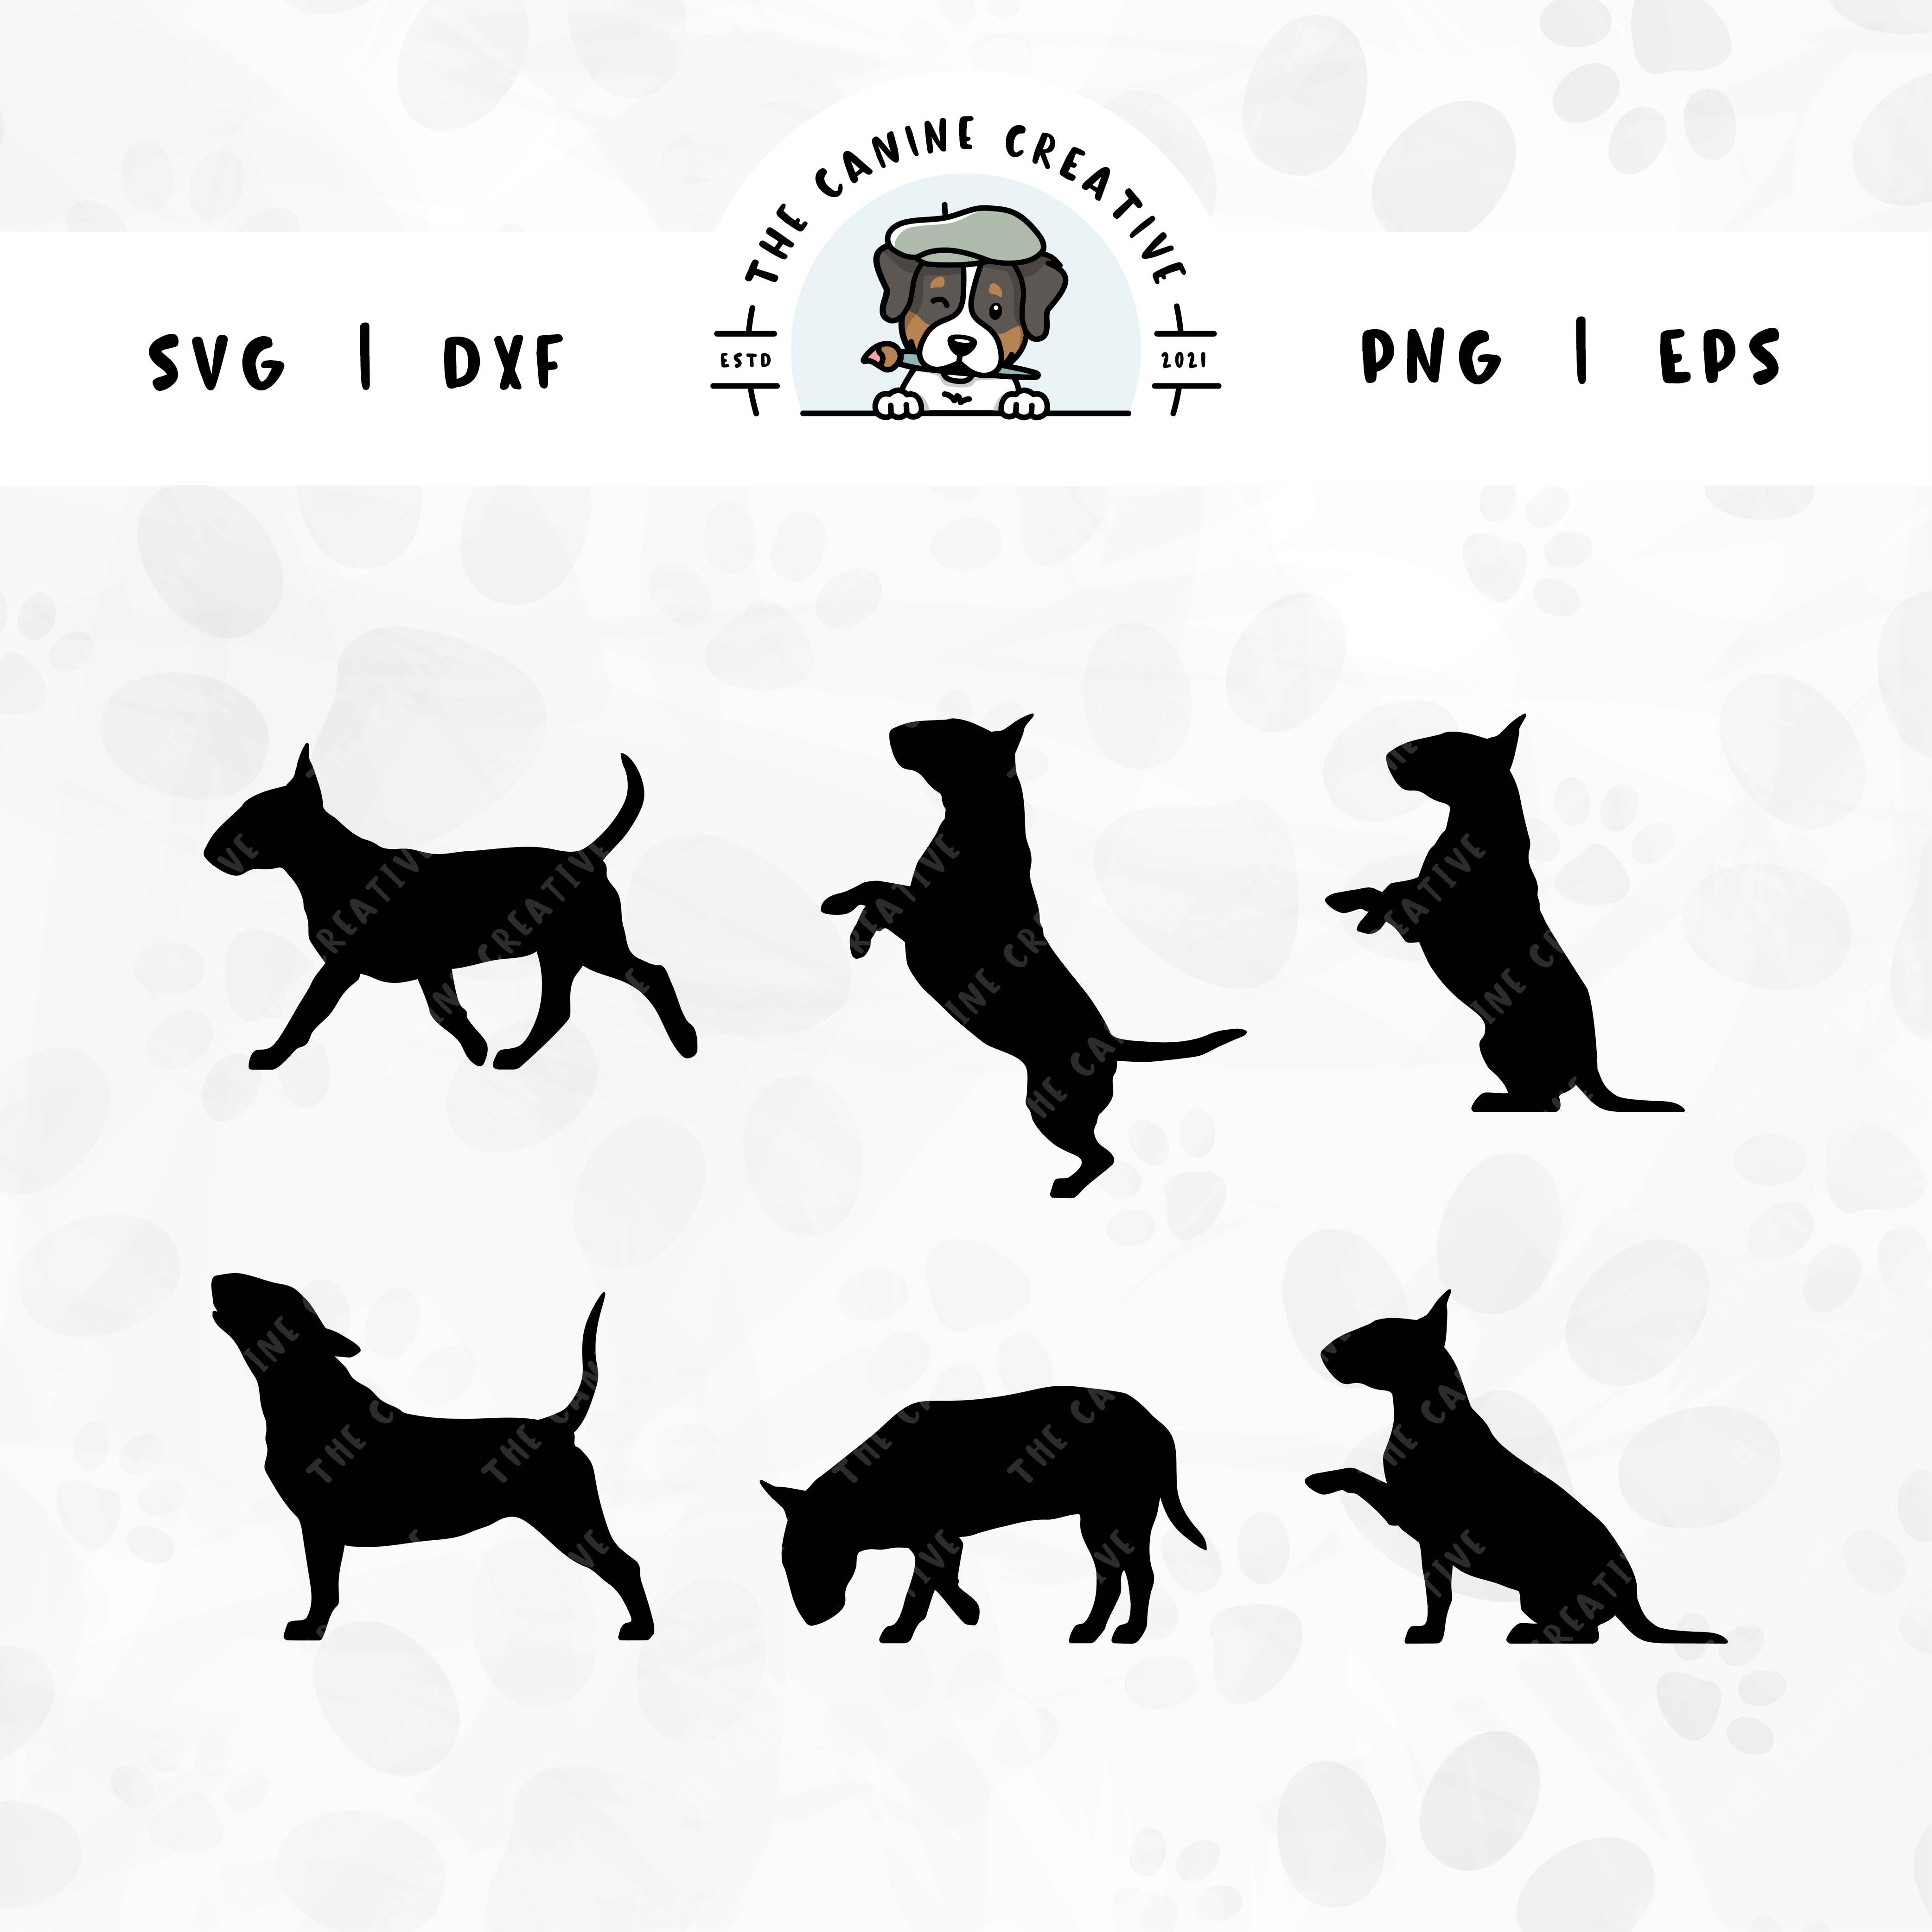 This 6-pack, Bull Terrier silhouette bundle (set 2) features various dog poses including walking, howling, jumping up, begging, sniffing, and shaking a paw. File formats include: SVG, DXF, PNG, and EPS.